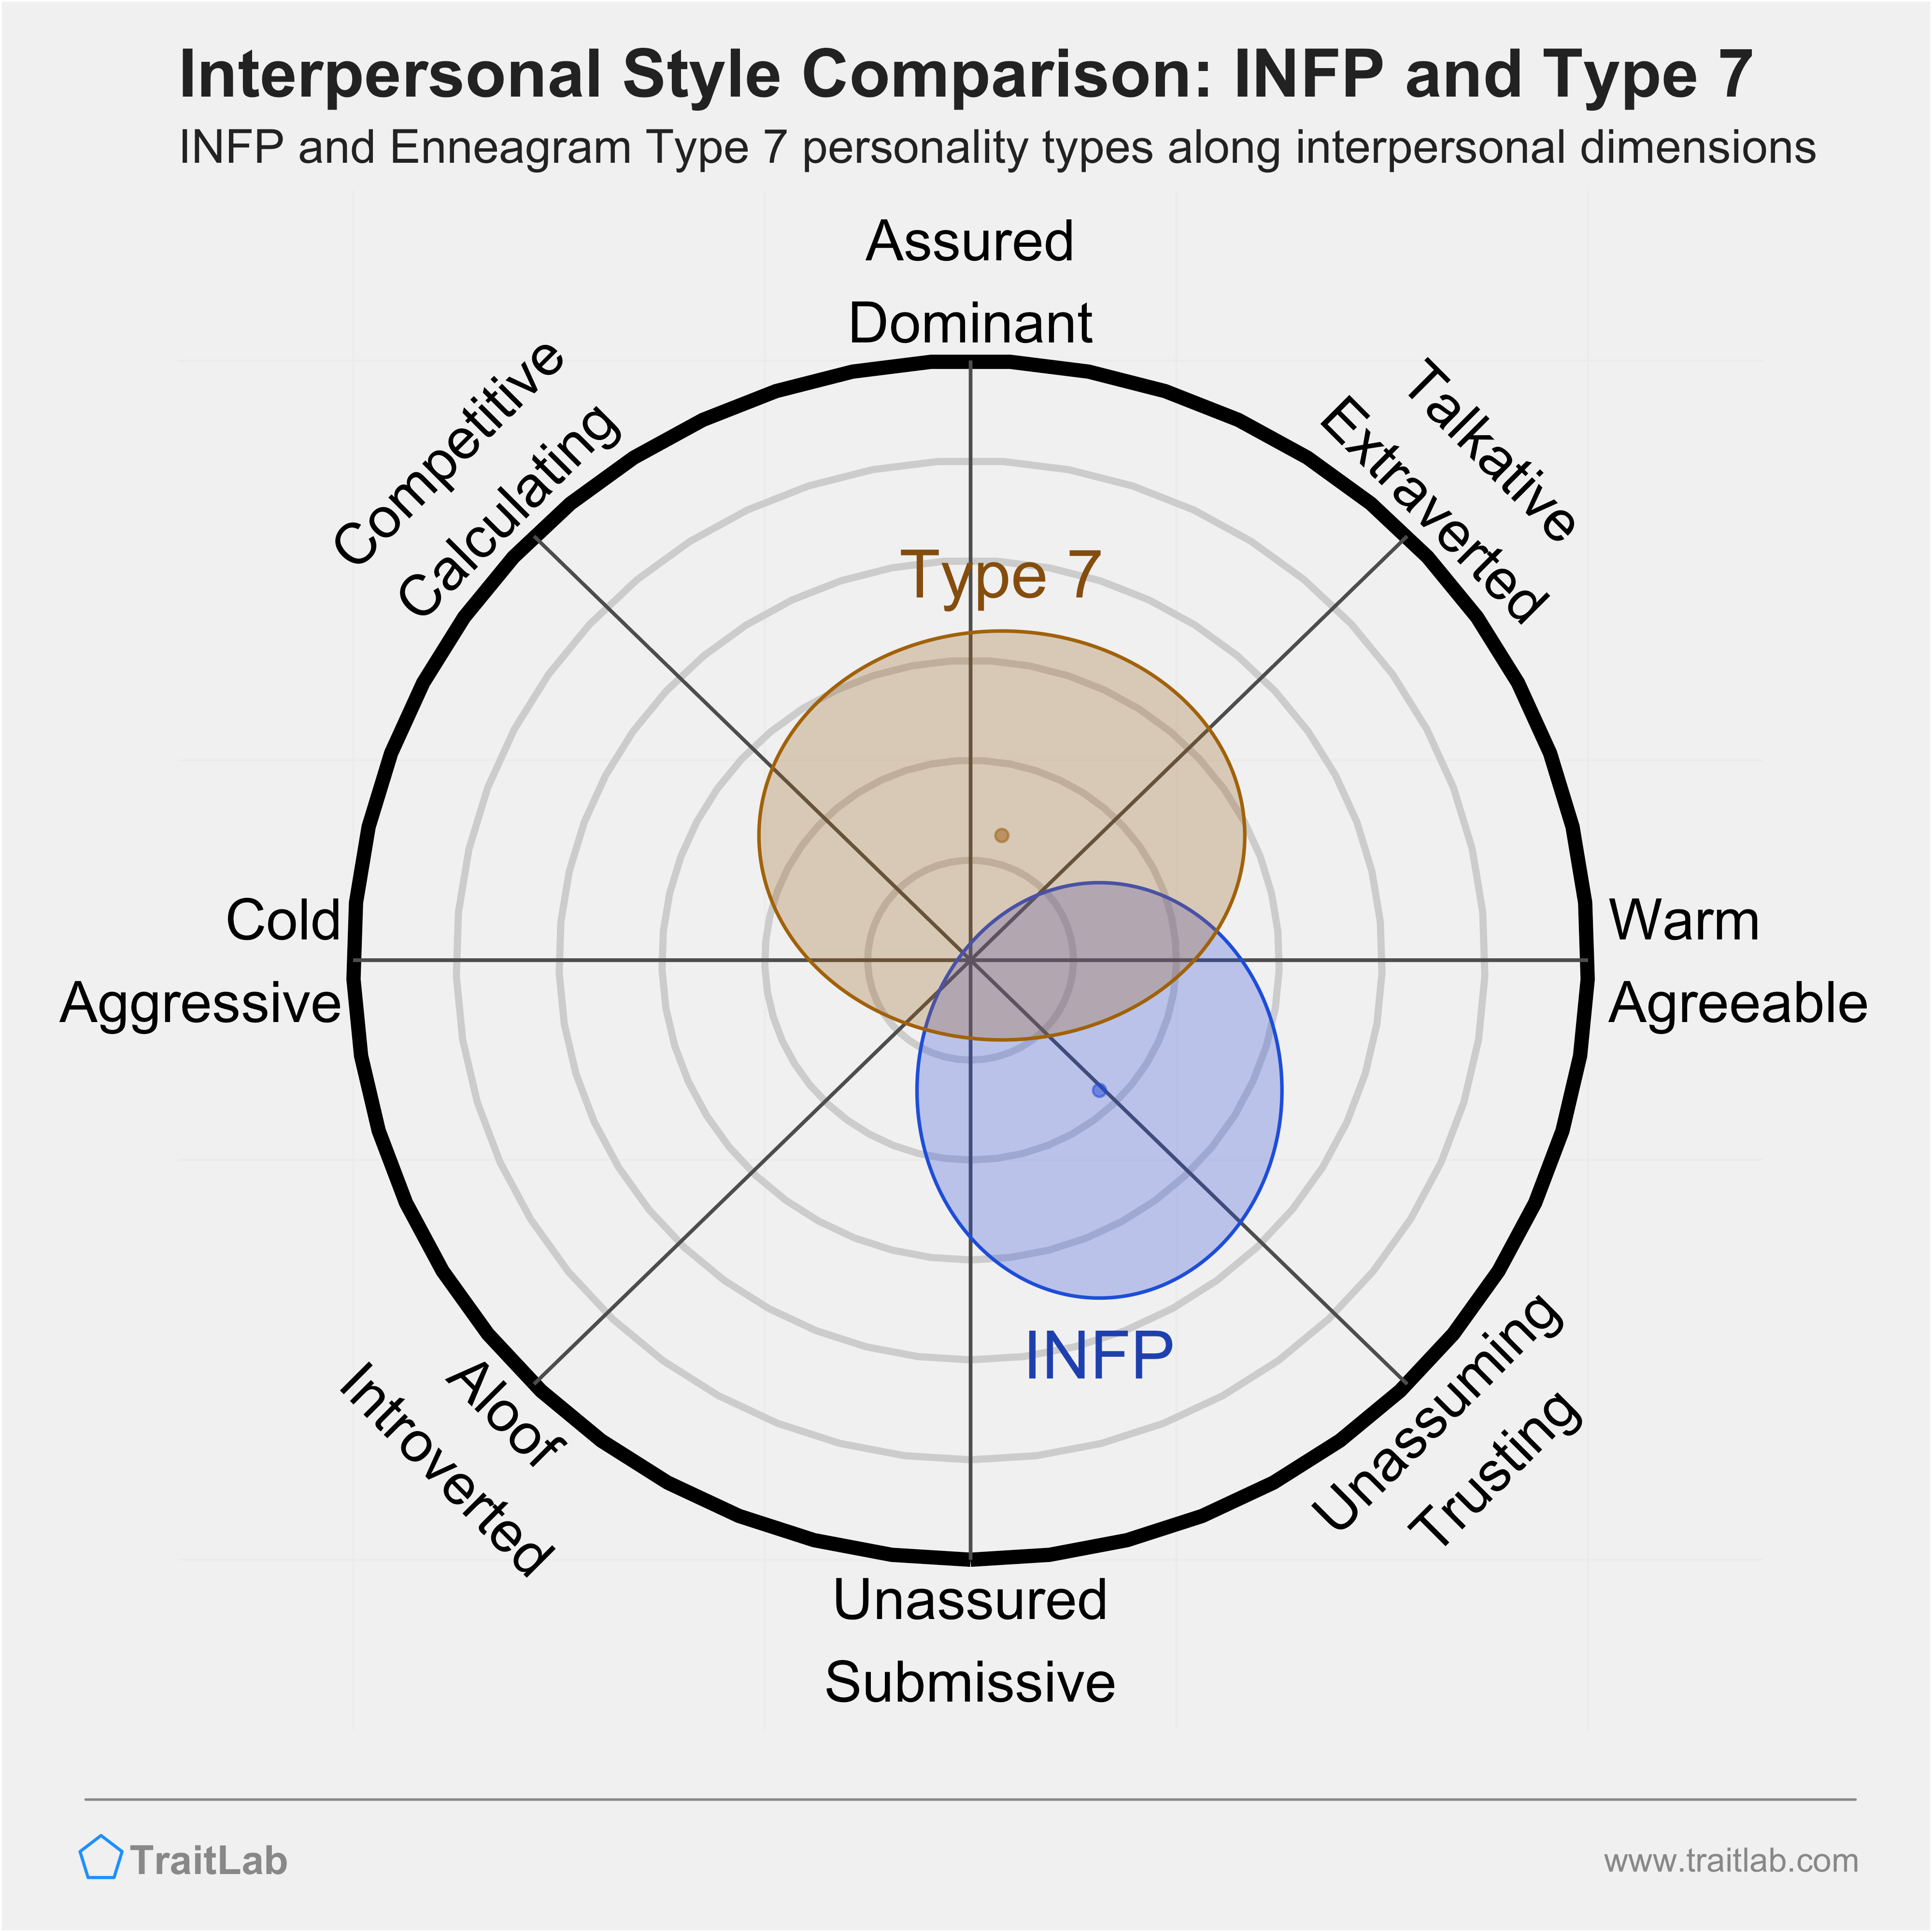 Enneagram INFP and Type 7 comparison across interpersonal dimensions